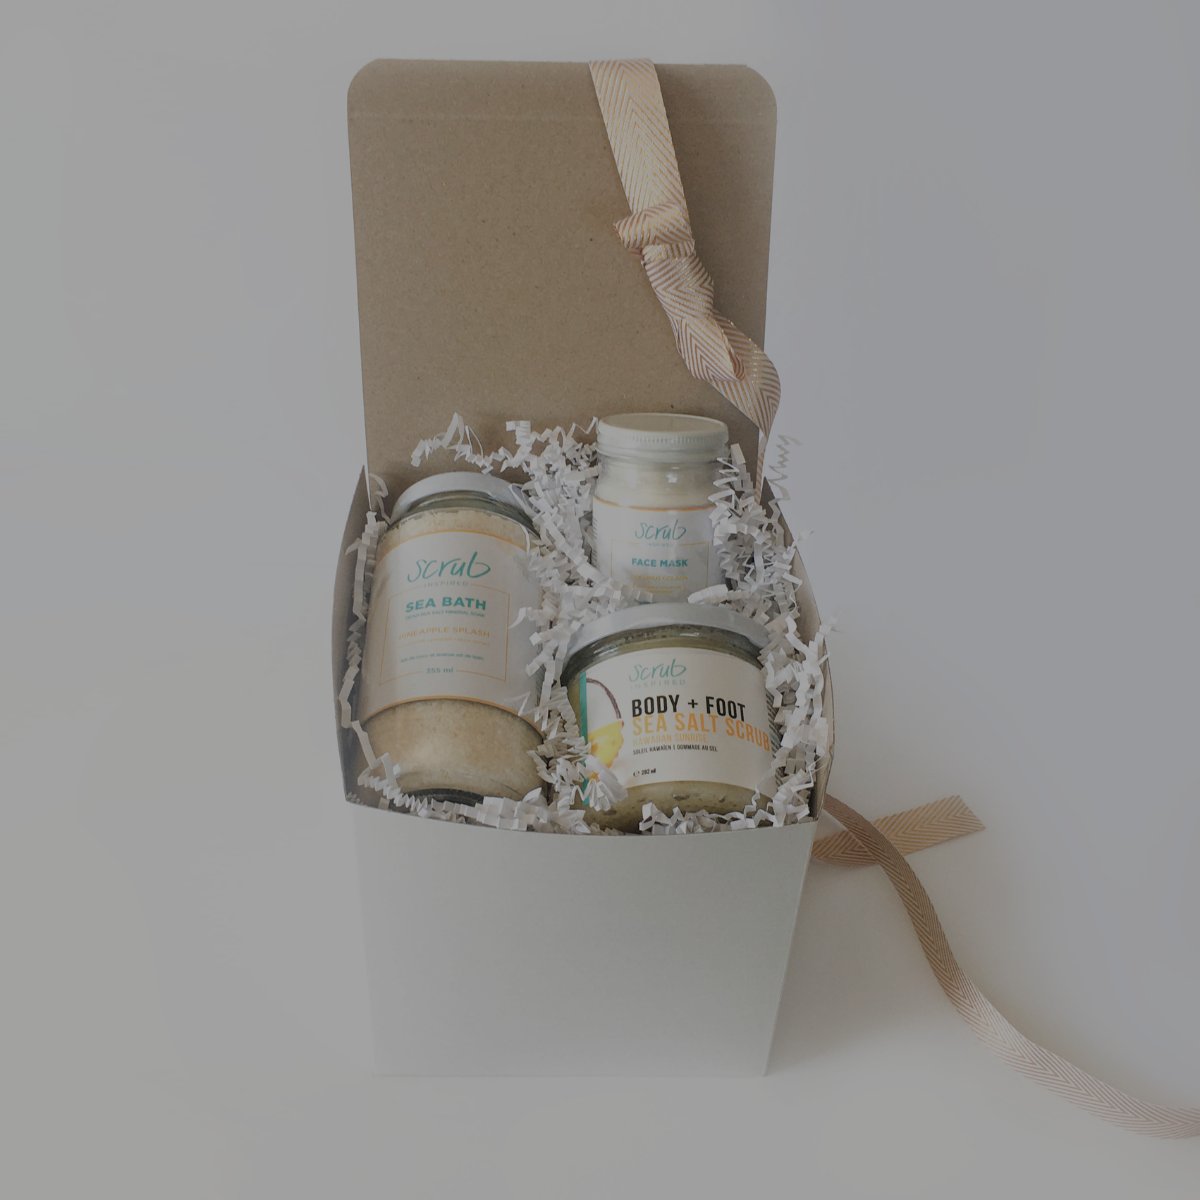 Skin Care Bundles and Gifts by Scrub Inspired. Made with all natural, vegan, and cruelty-free ingredients. Clean beauty products and gift boxes, gift sets, gifts, made in Cape Breton, Nova Scotia, Canada.